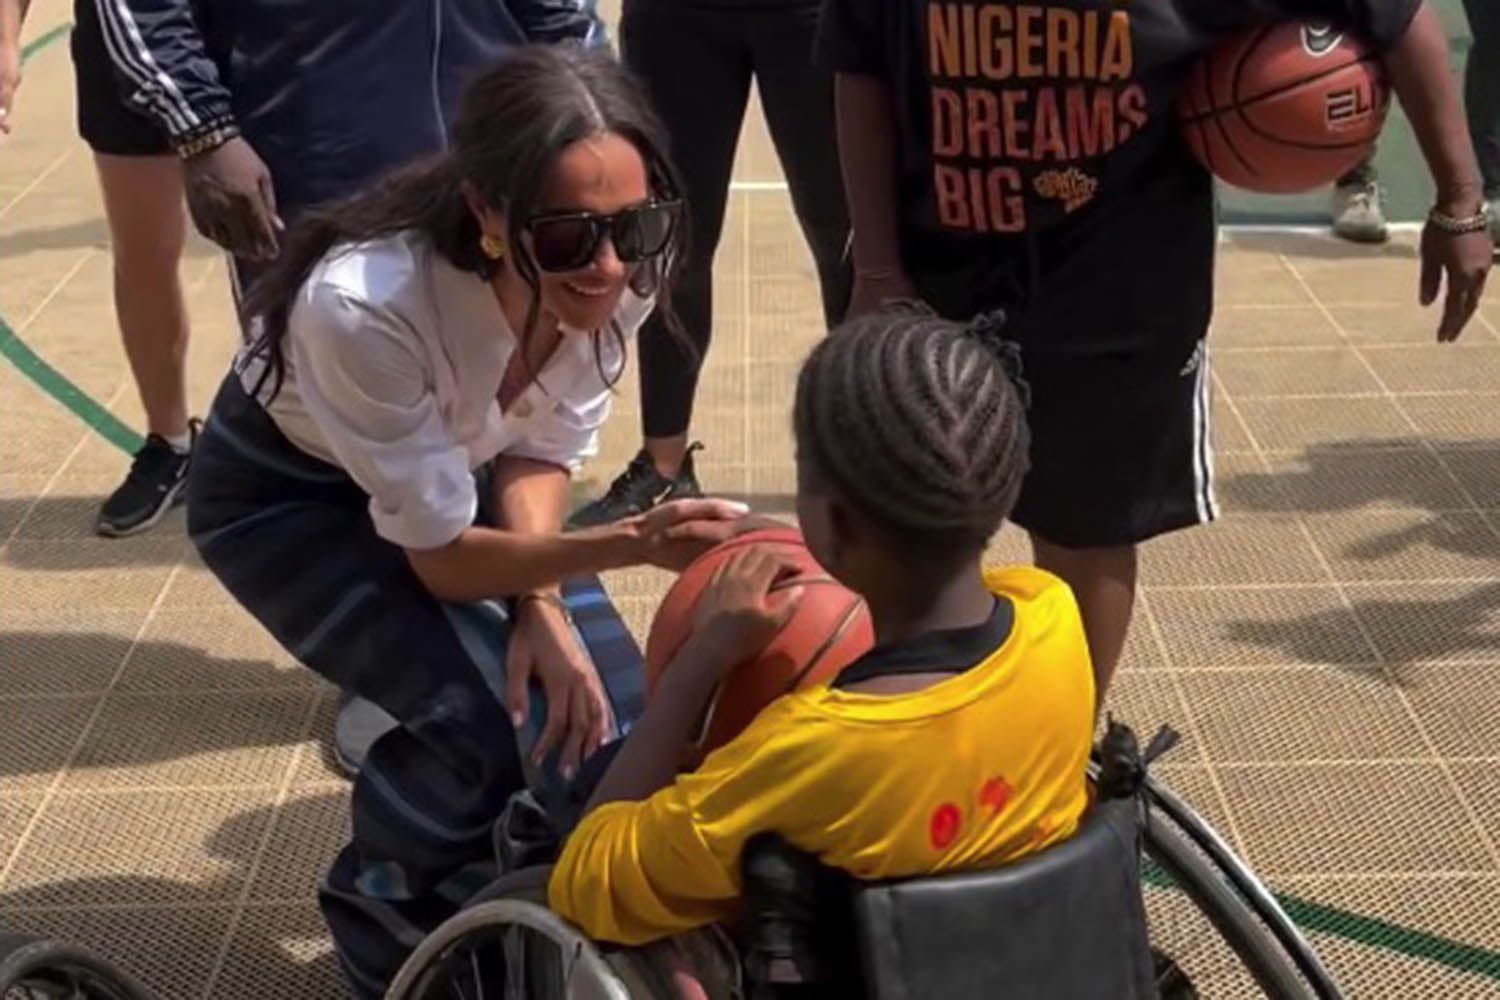 Meghan Markle Receives 'Happy Mother's Day' Wish on Final Day in Nigeria with Prince Harry